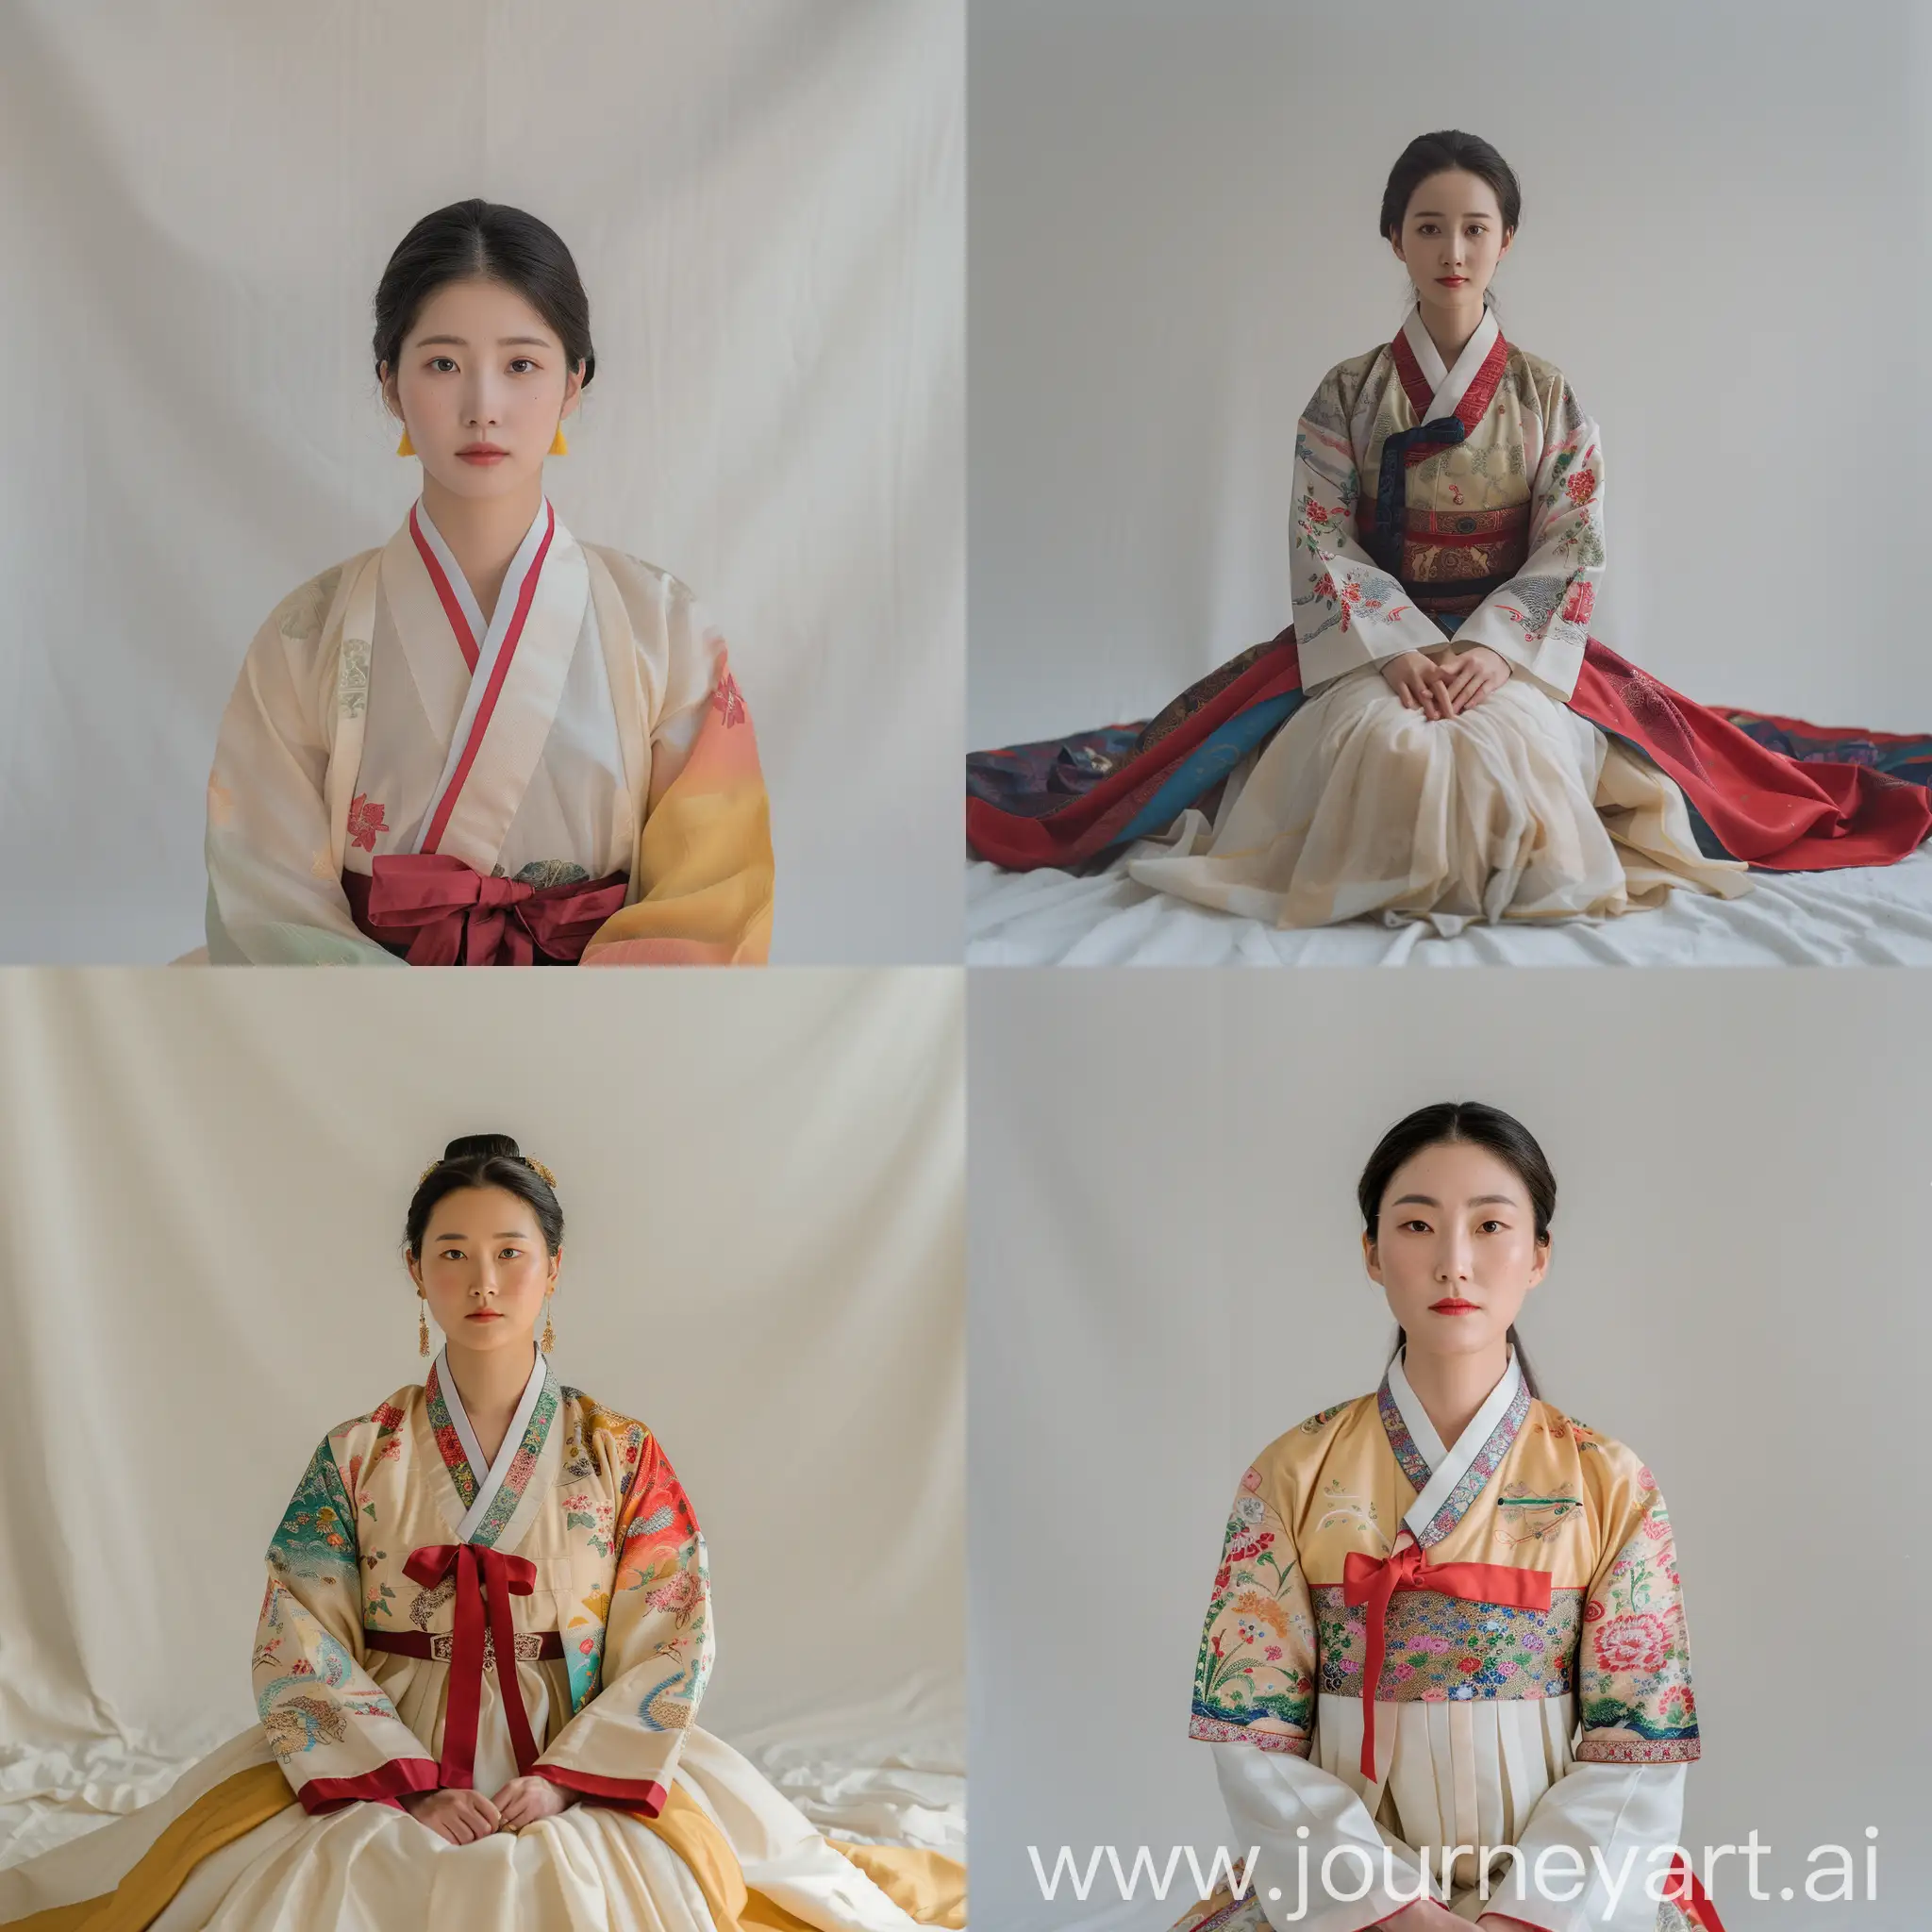 Graceful-Asian-Woman-in-Traditional-Hanbok-Capturing-Cultural-Beauty